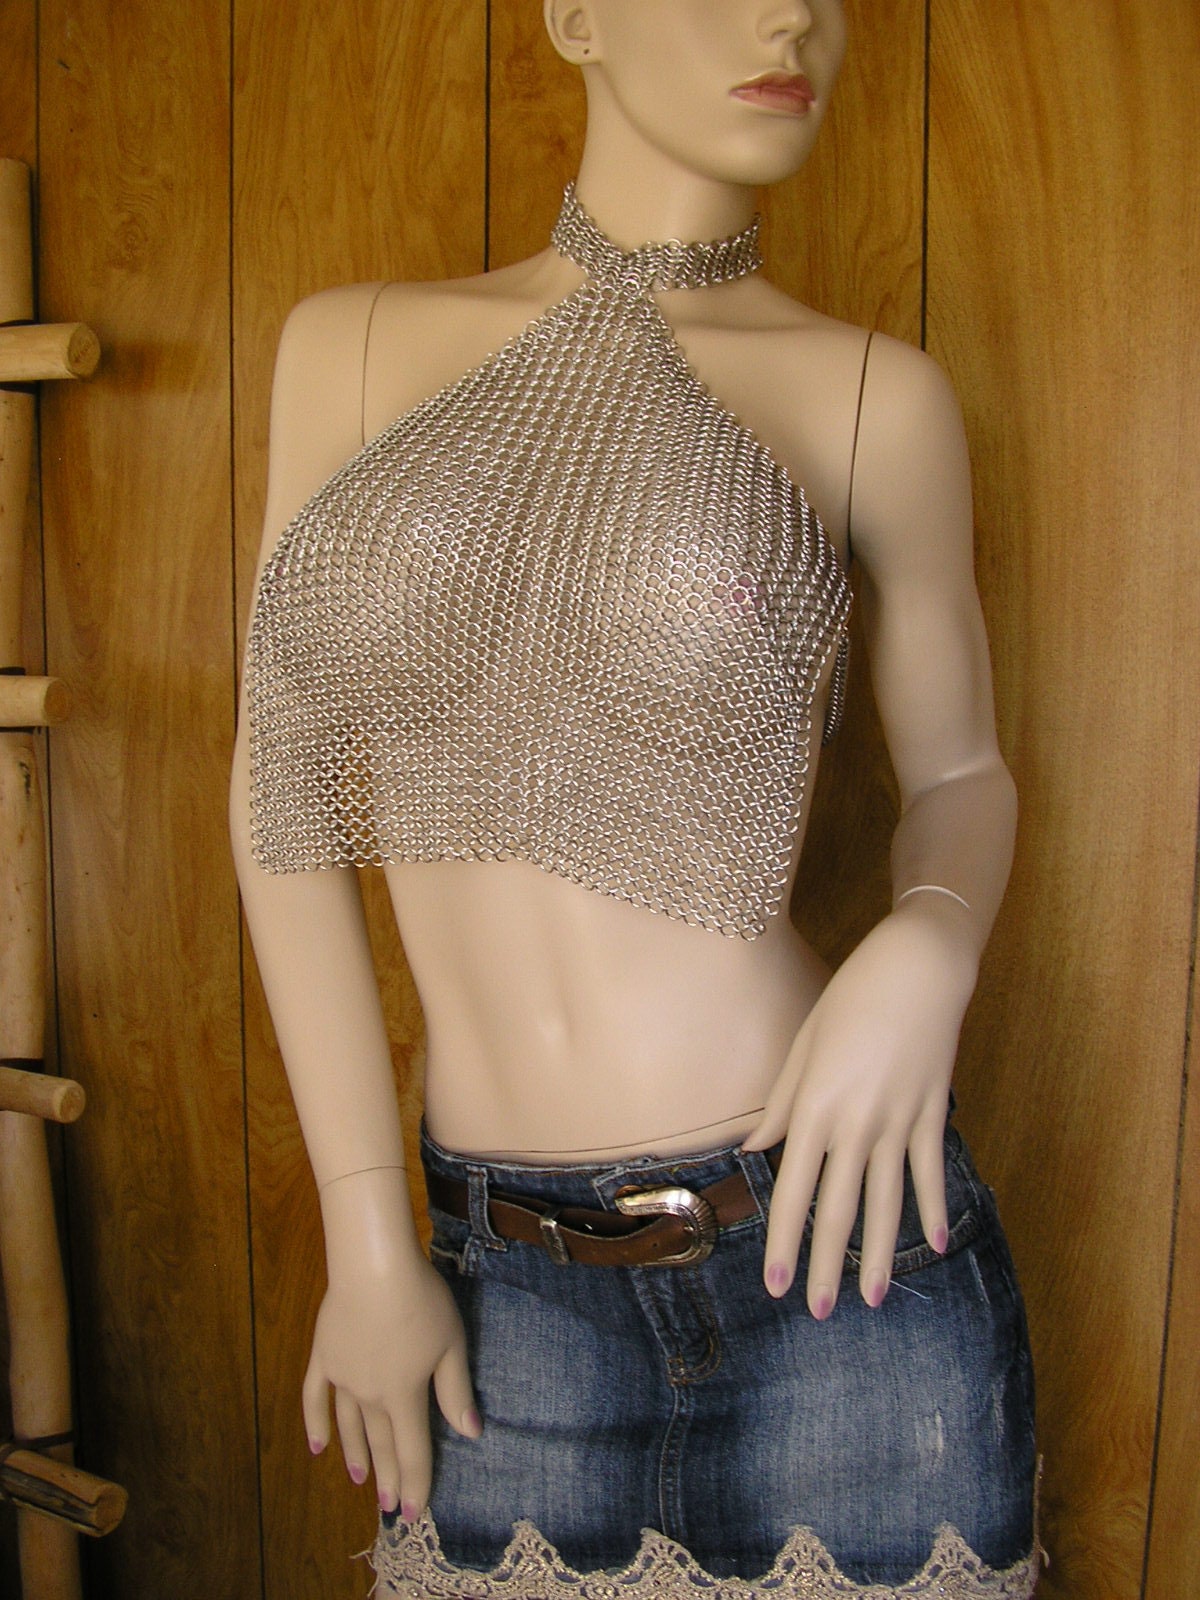 Chainmail Breastplate, Unisex, Halter Top, 4 in 1 Chainmail Front With Open  Back, Full-persian at Neck and Across Back, One Size Fits Most 